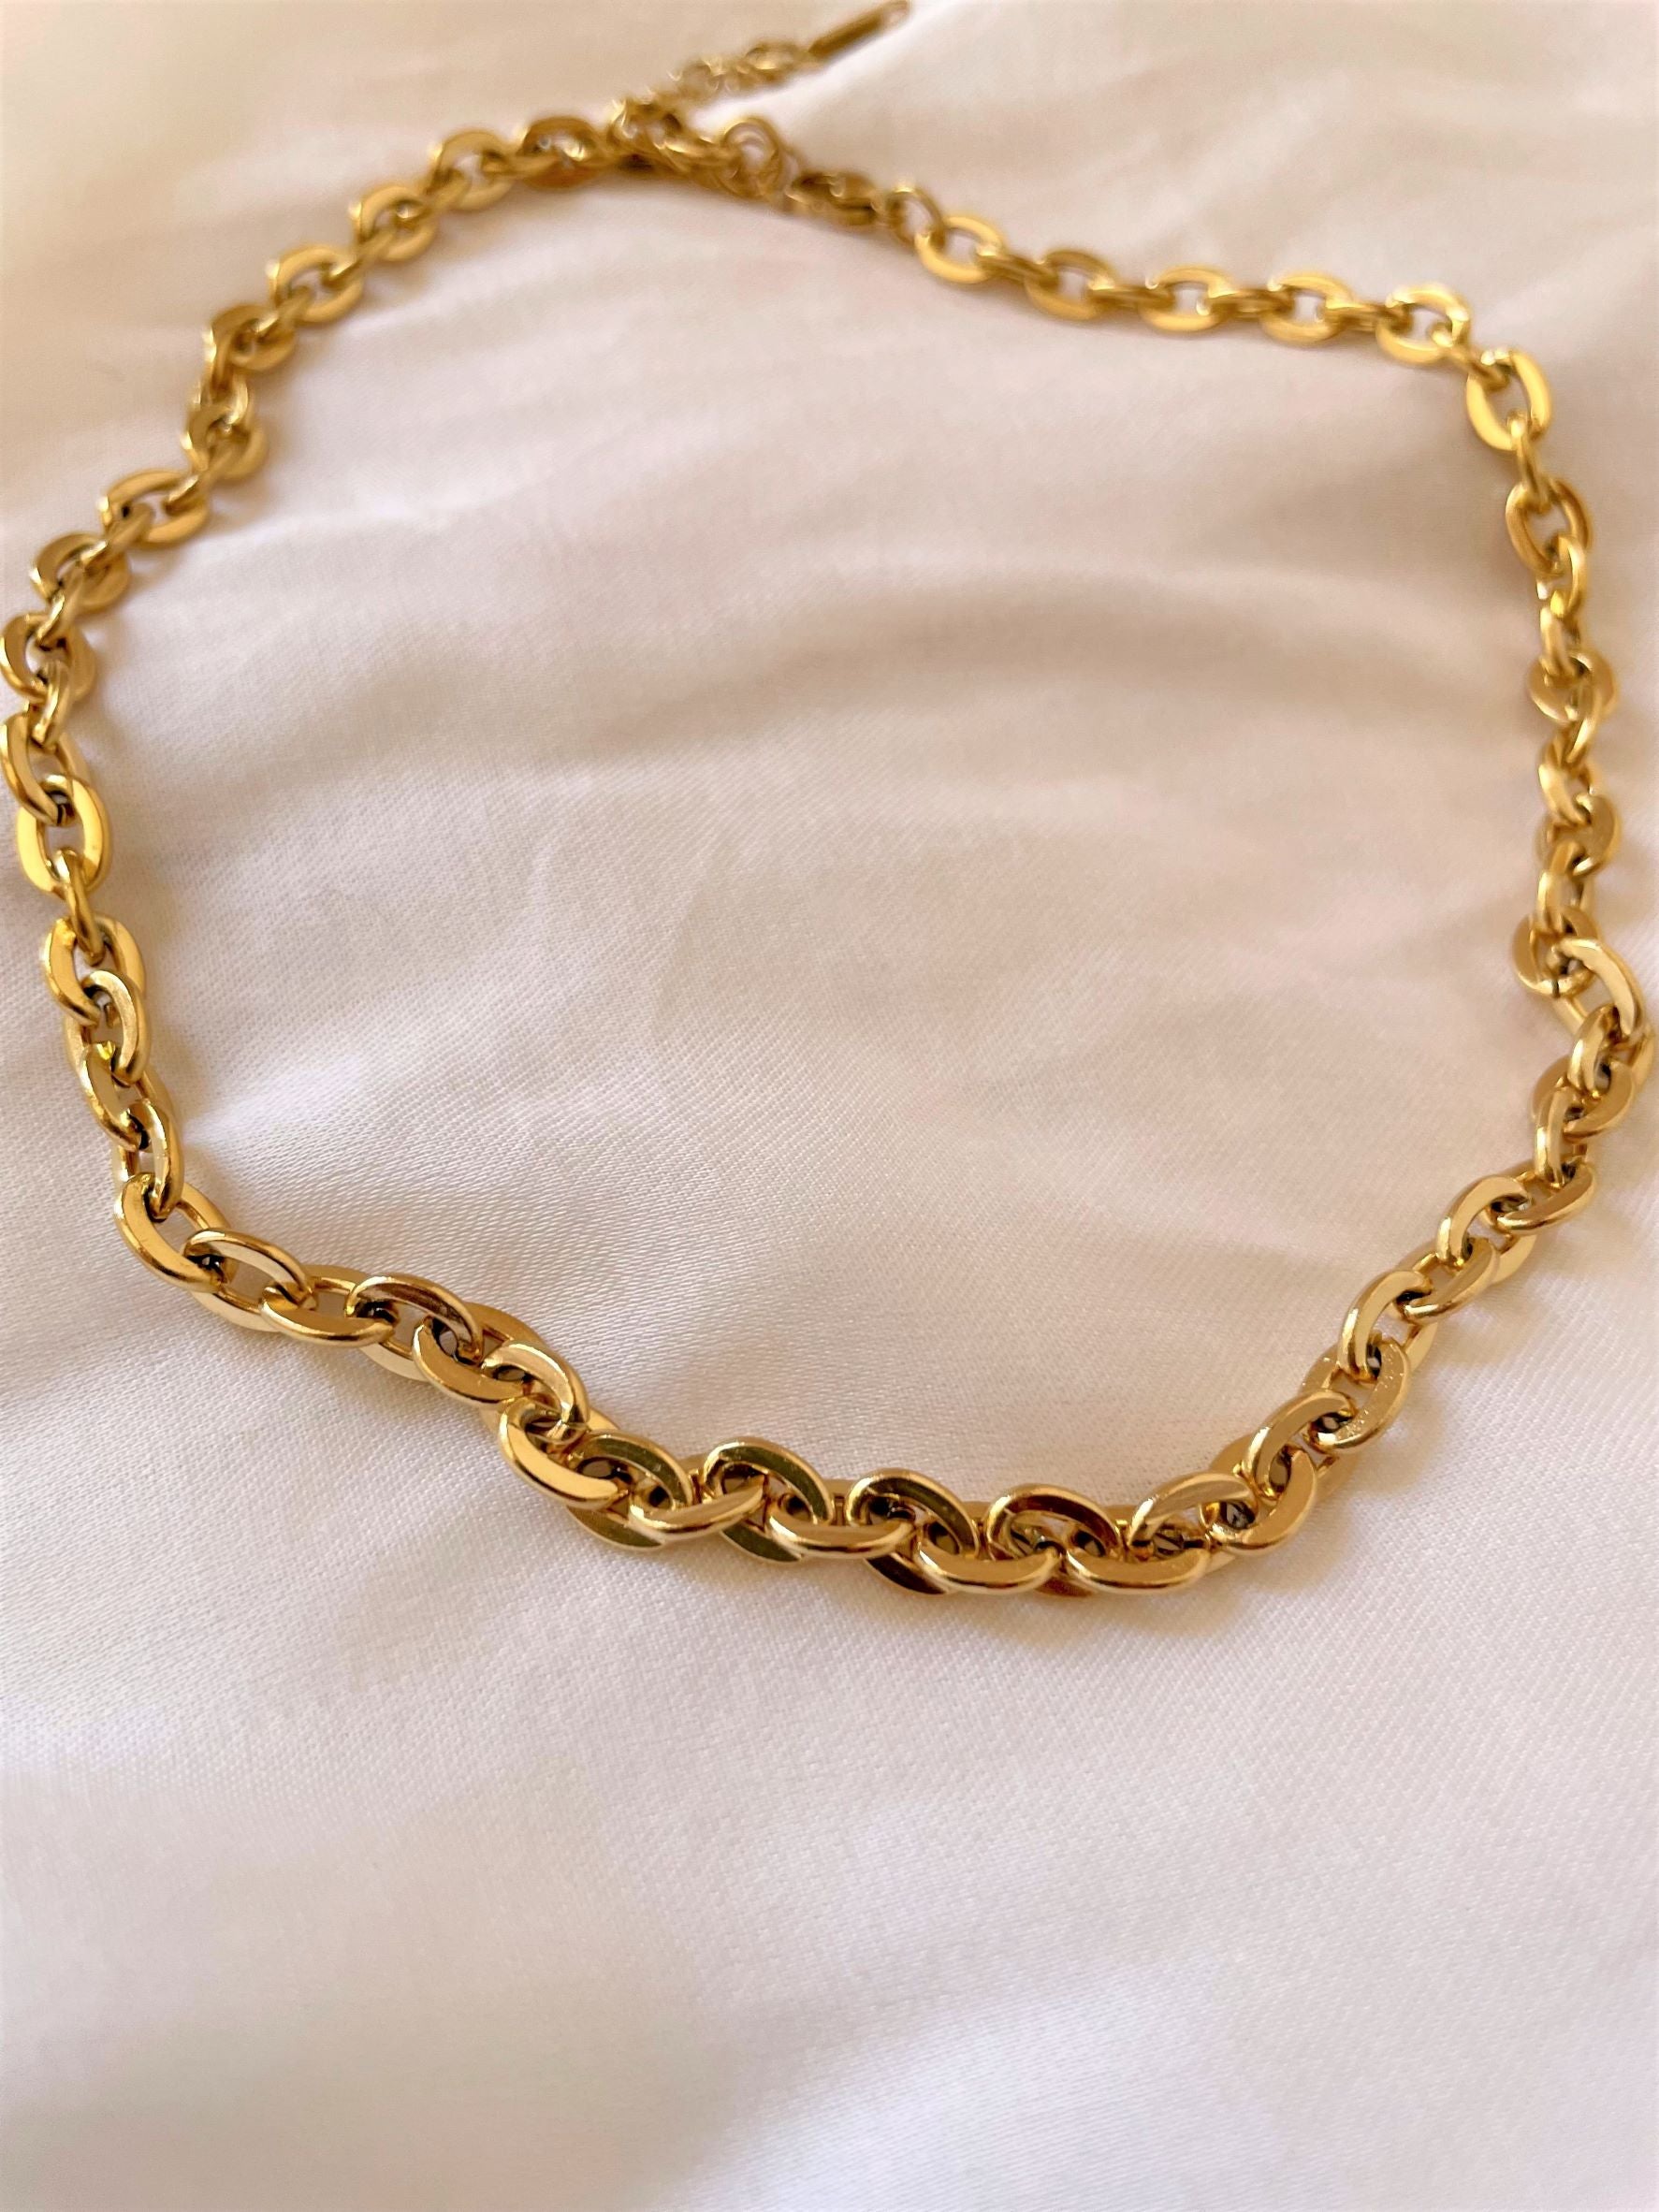 CHAIN LINK NECKLACE - GOLD PLATED